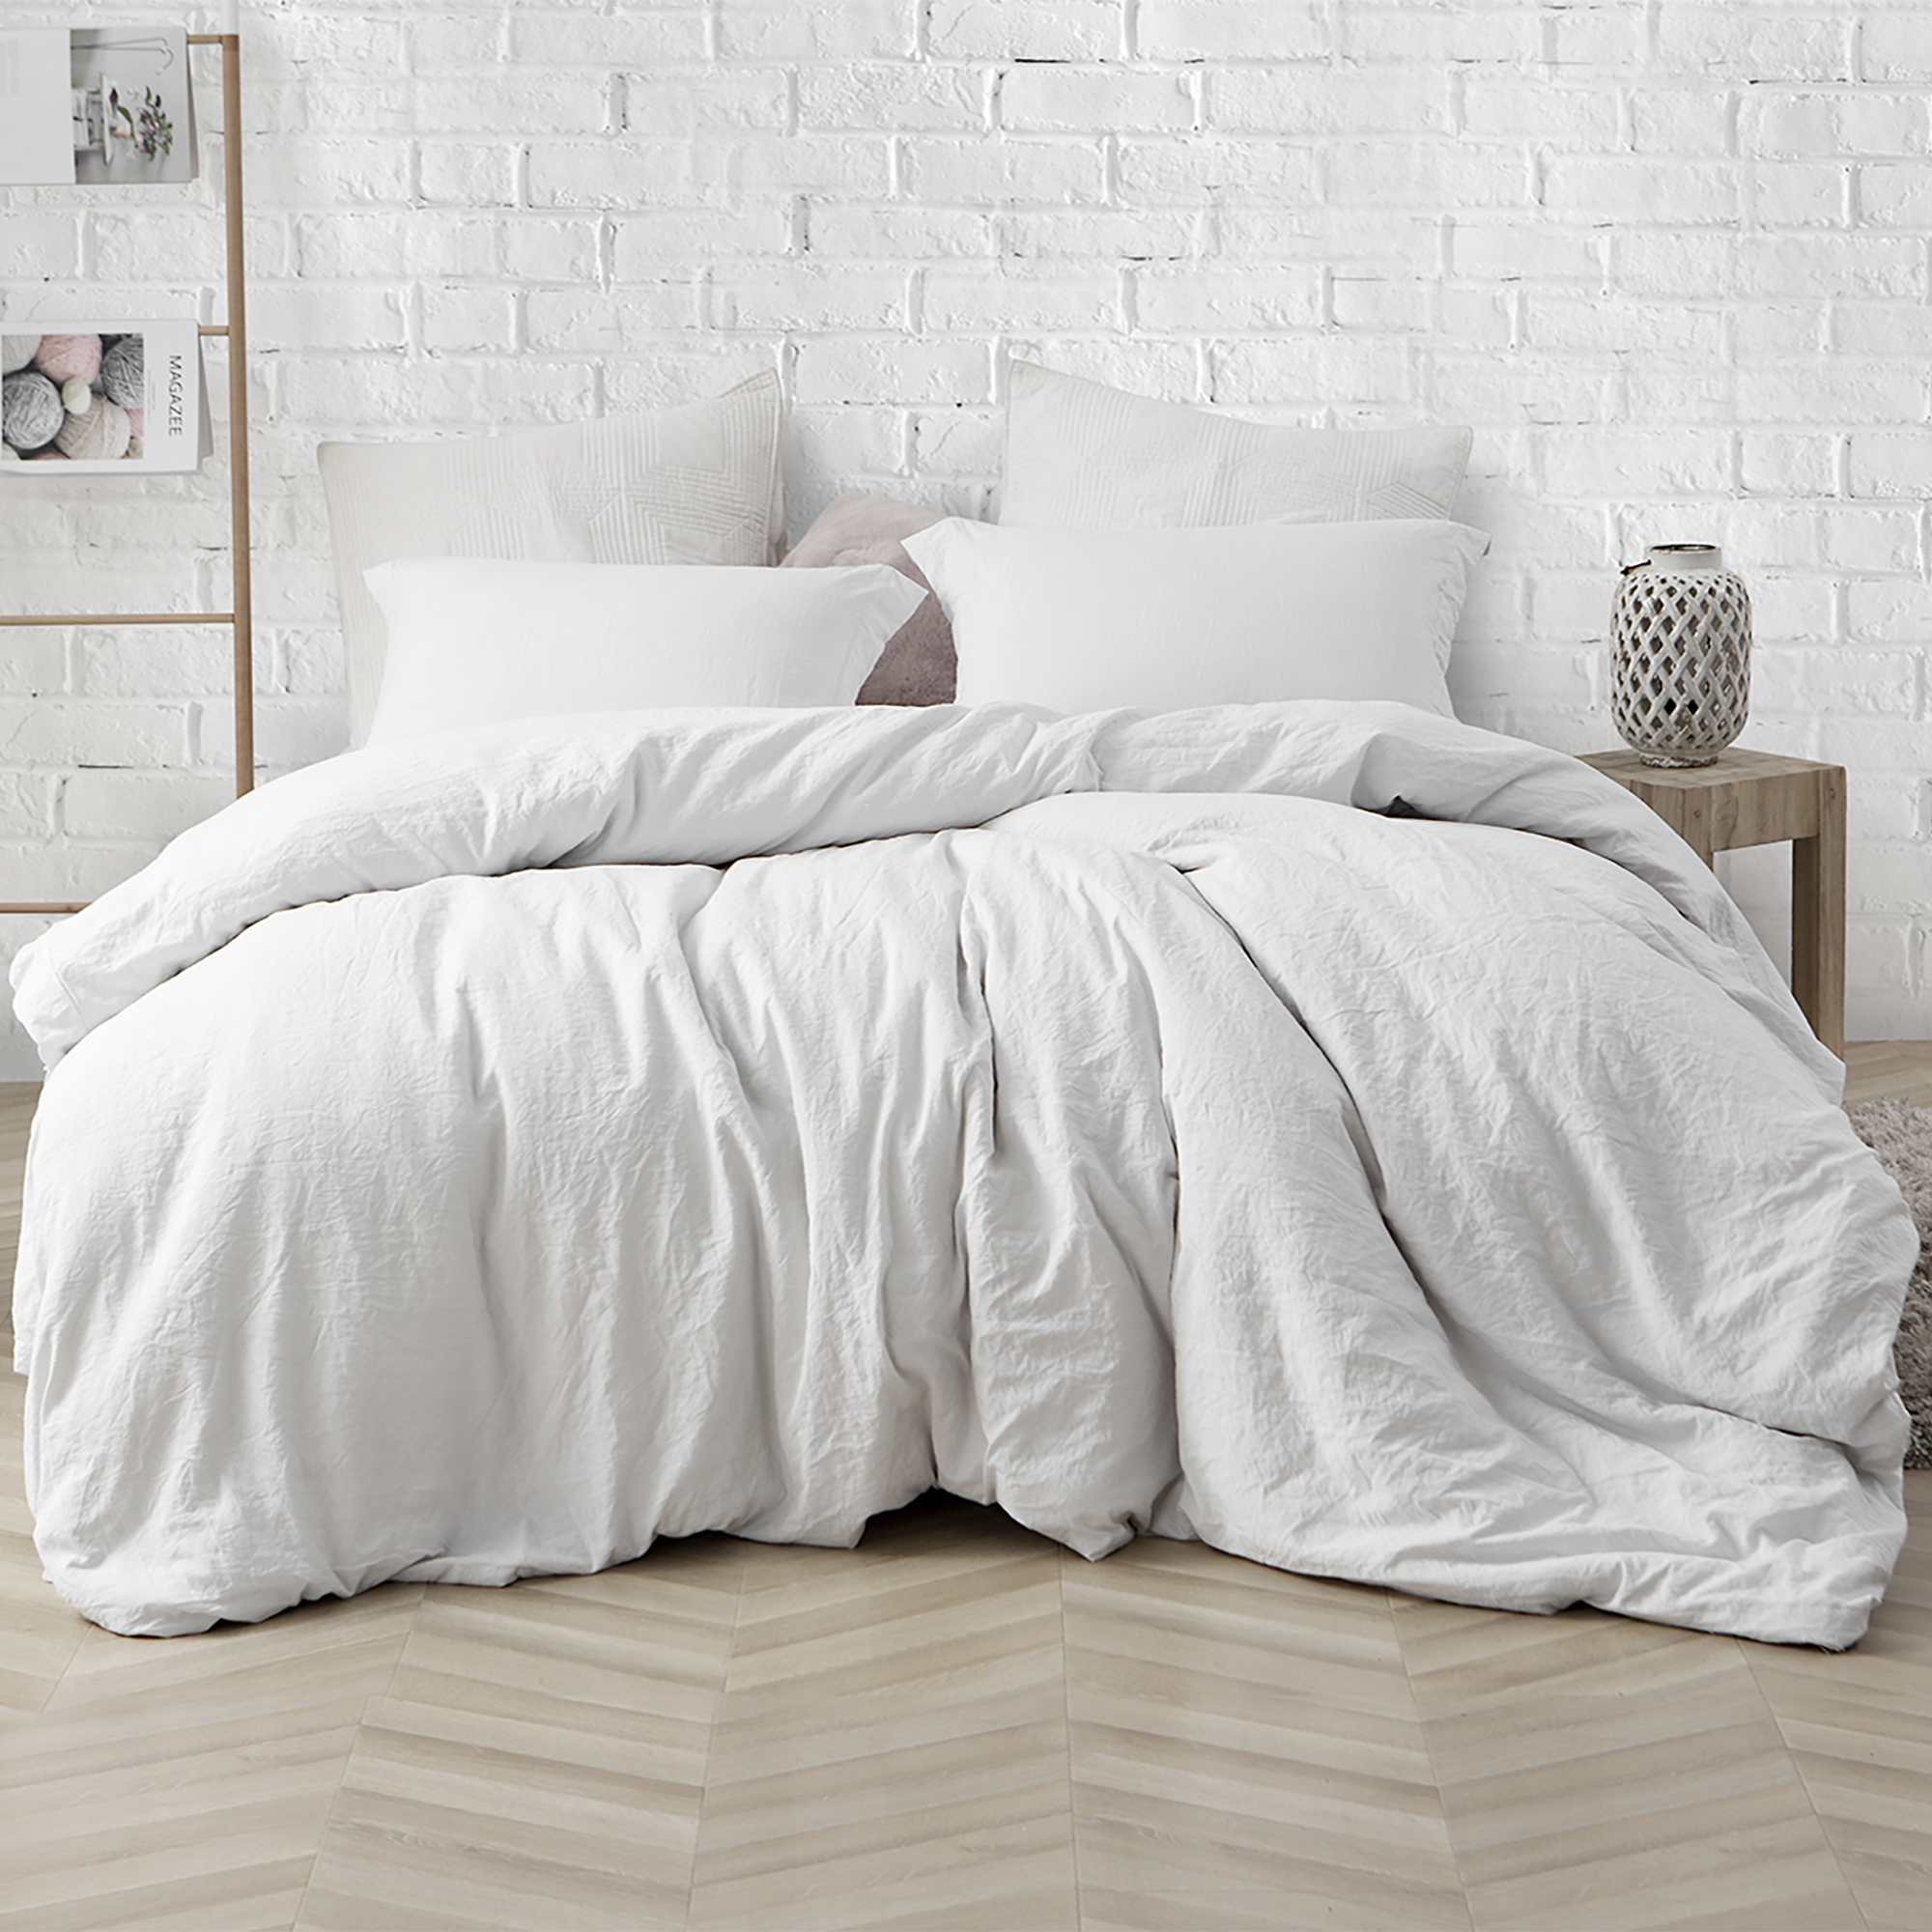 True Twin, Queen, or King Oversized Comforter and XL Duvet Cover Bedding Set